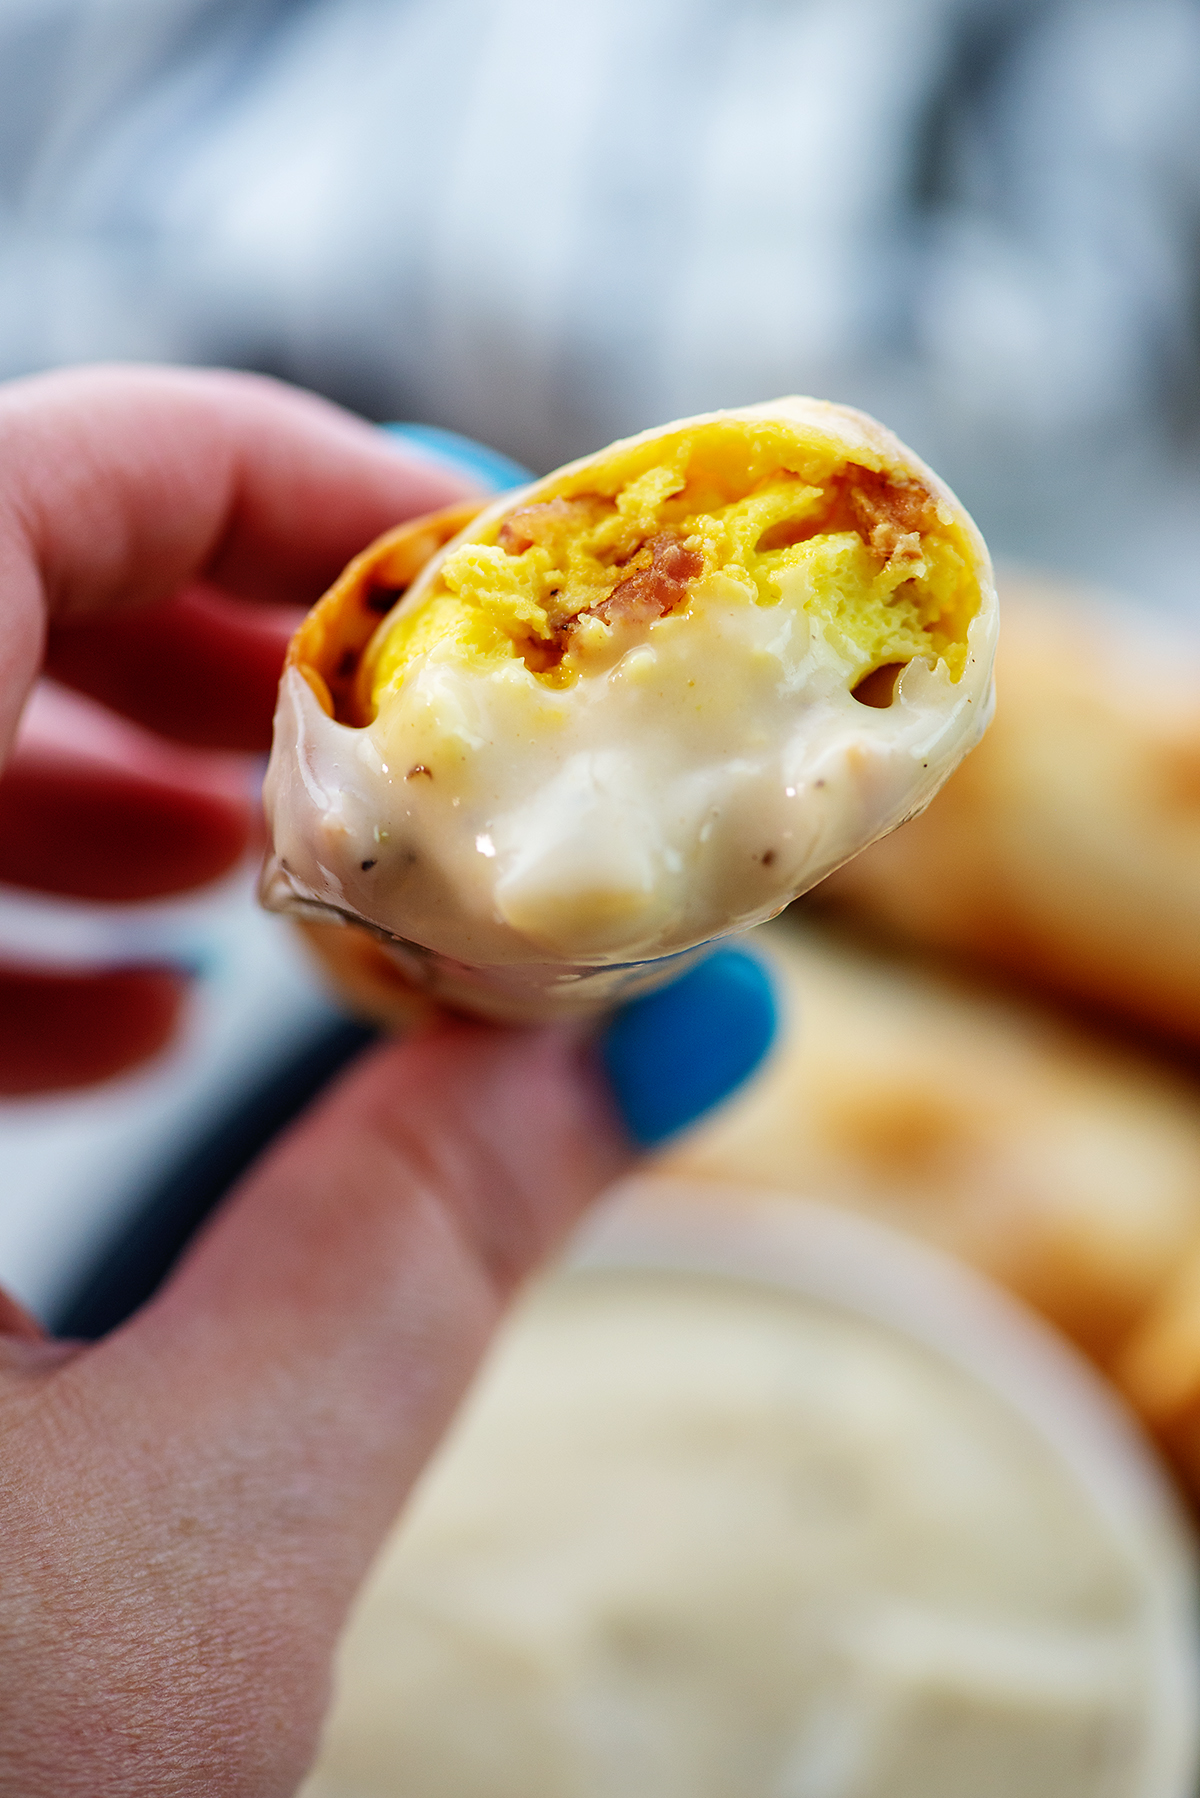 Close up of an egg roll dipped in gravy being held up to the camera.